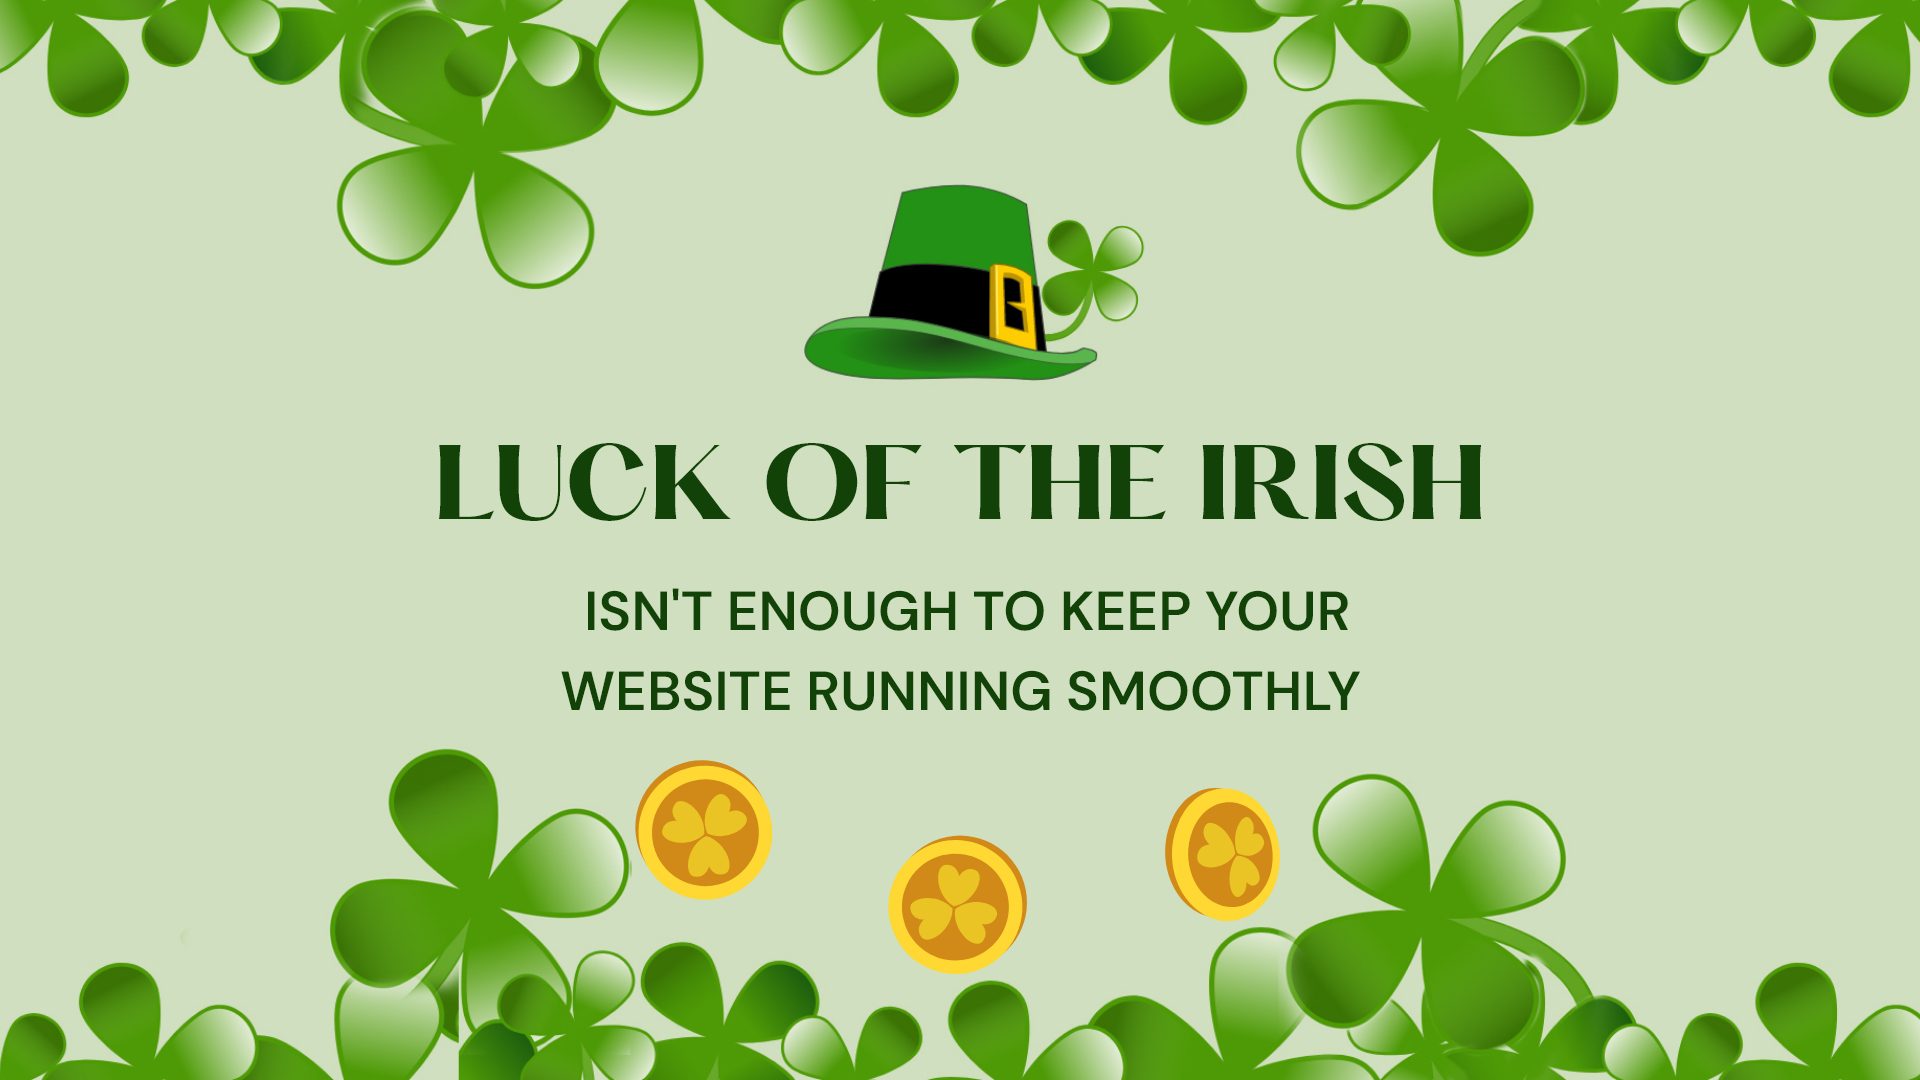 Luck of the Irish Isn't Enough to Keep Your Website Running Smoothly